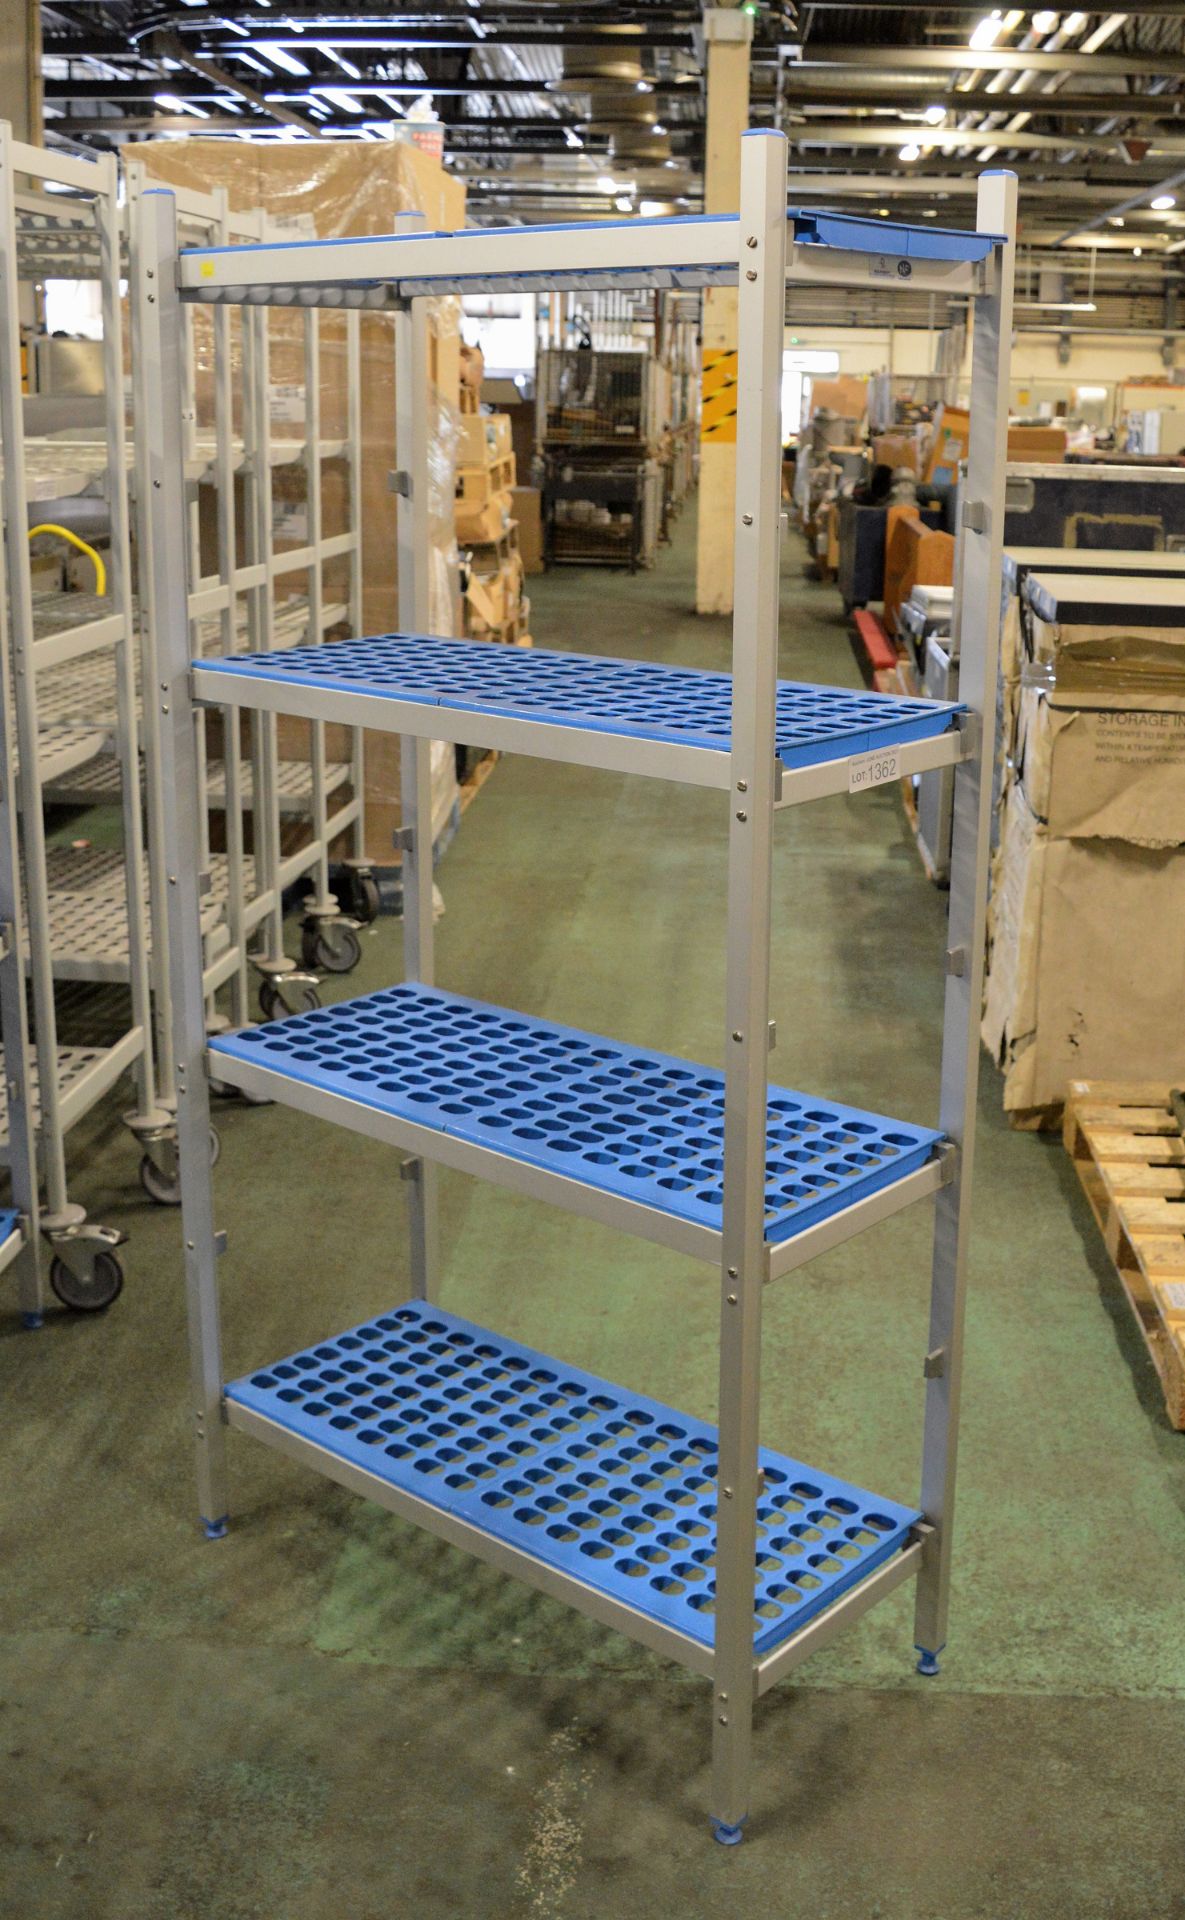 4 Tier Alloy And Plastic Static Racking L 900mm x W 420mm x H 1720mm - Image 2 of 2